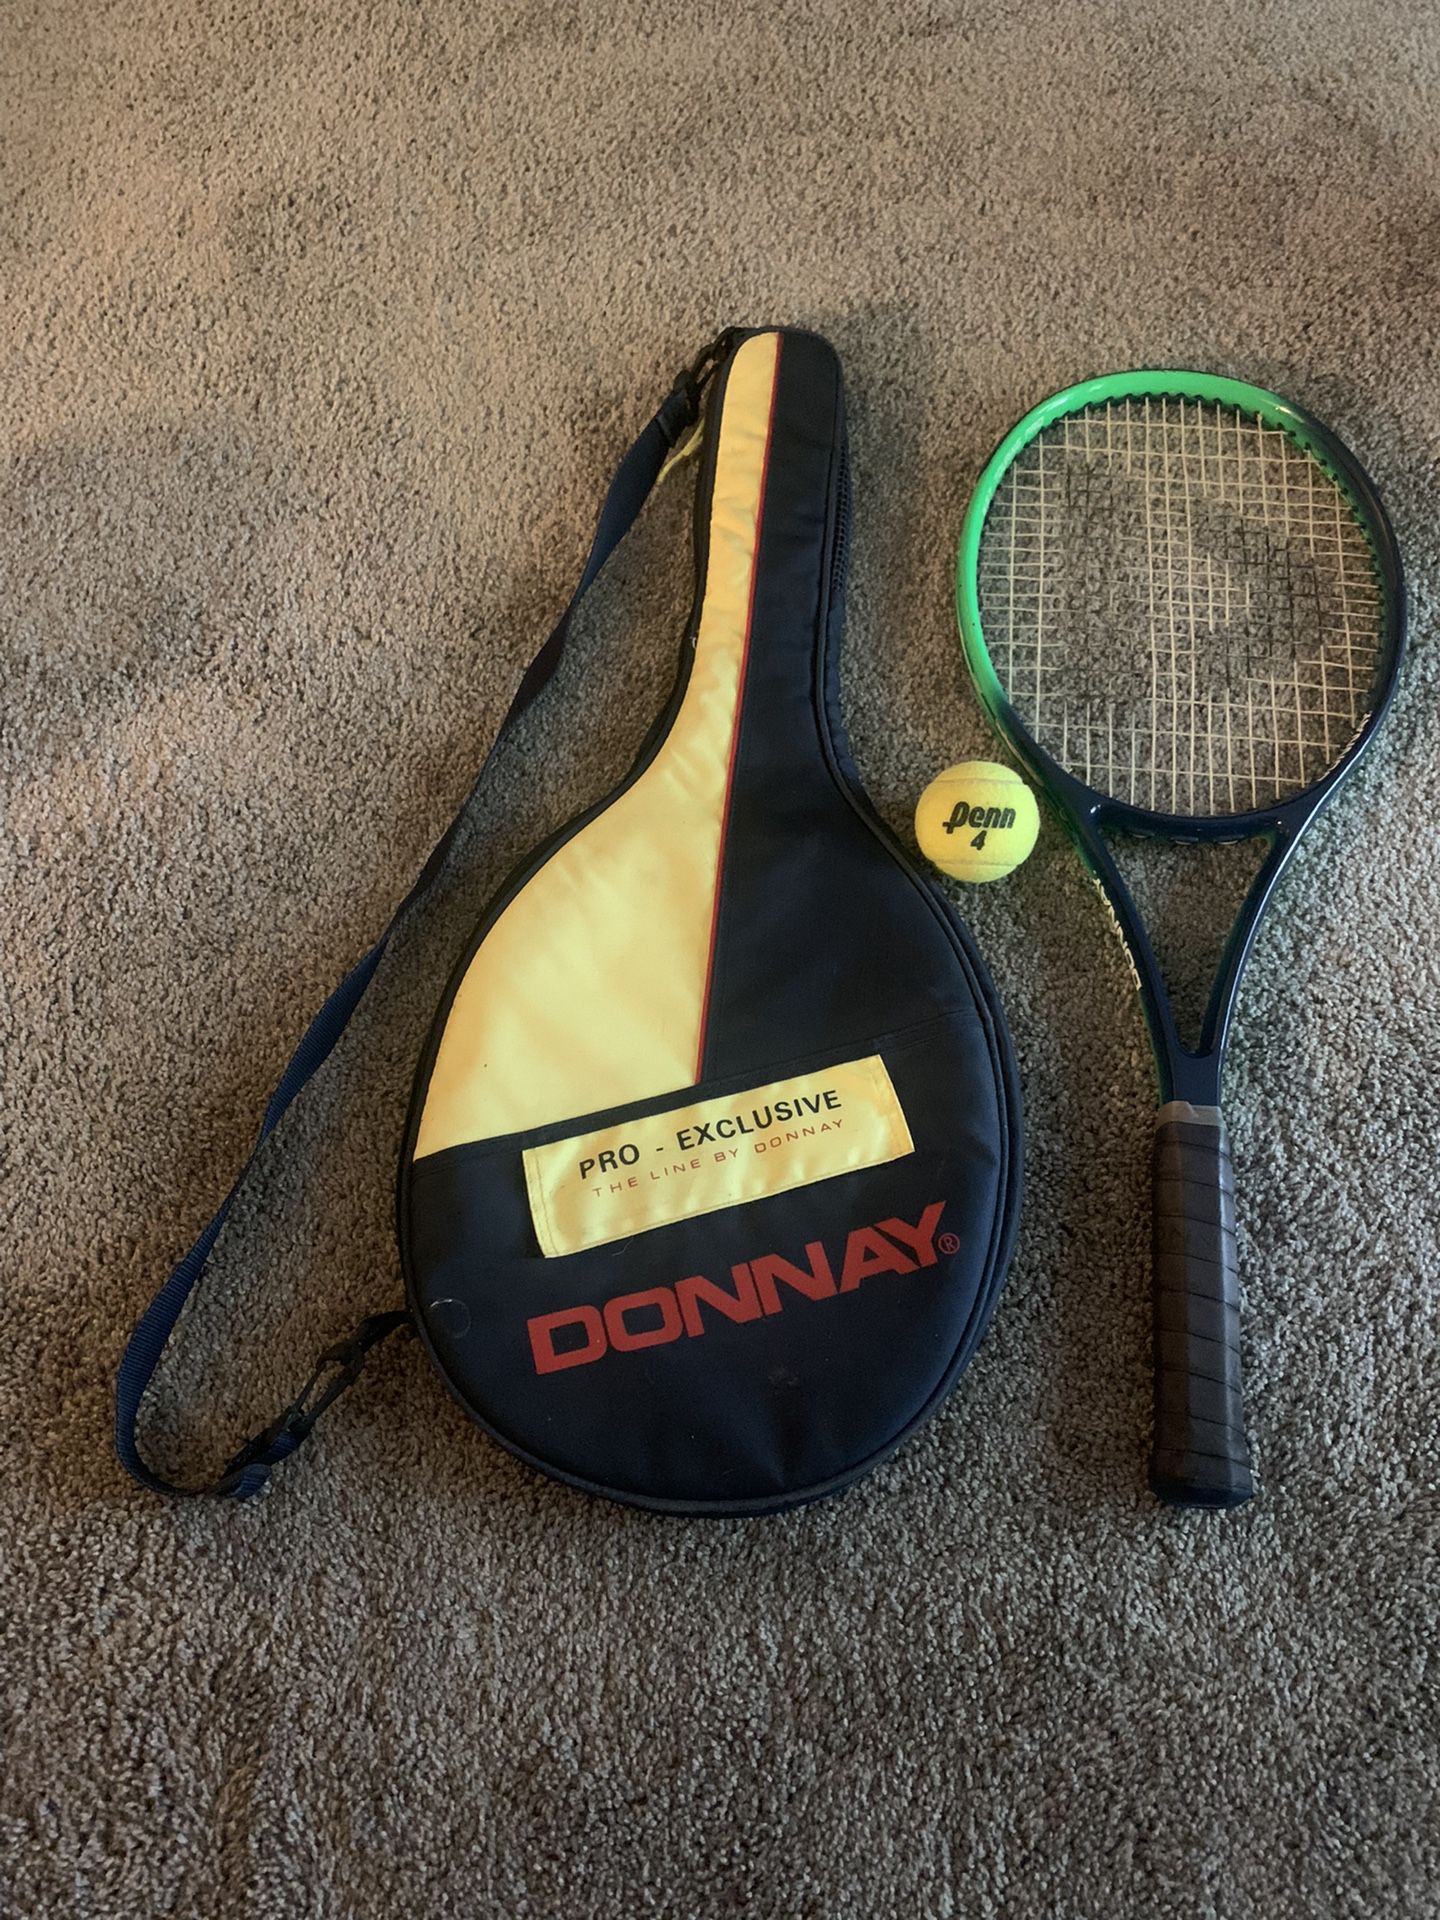 Mens Tennis Racket, Case And Ball